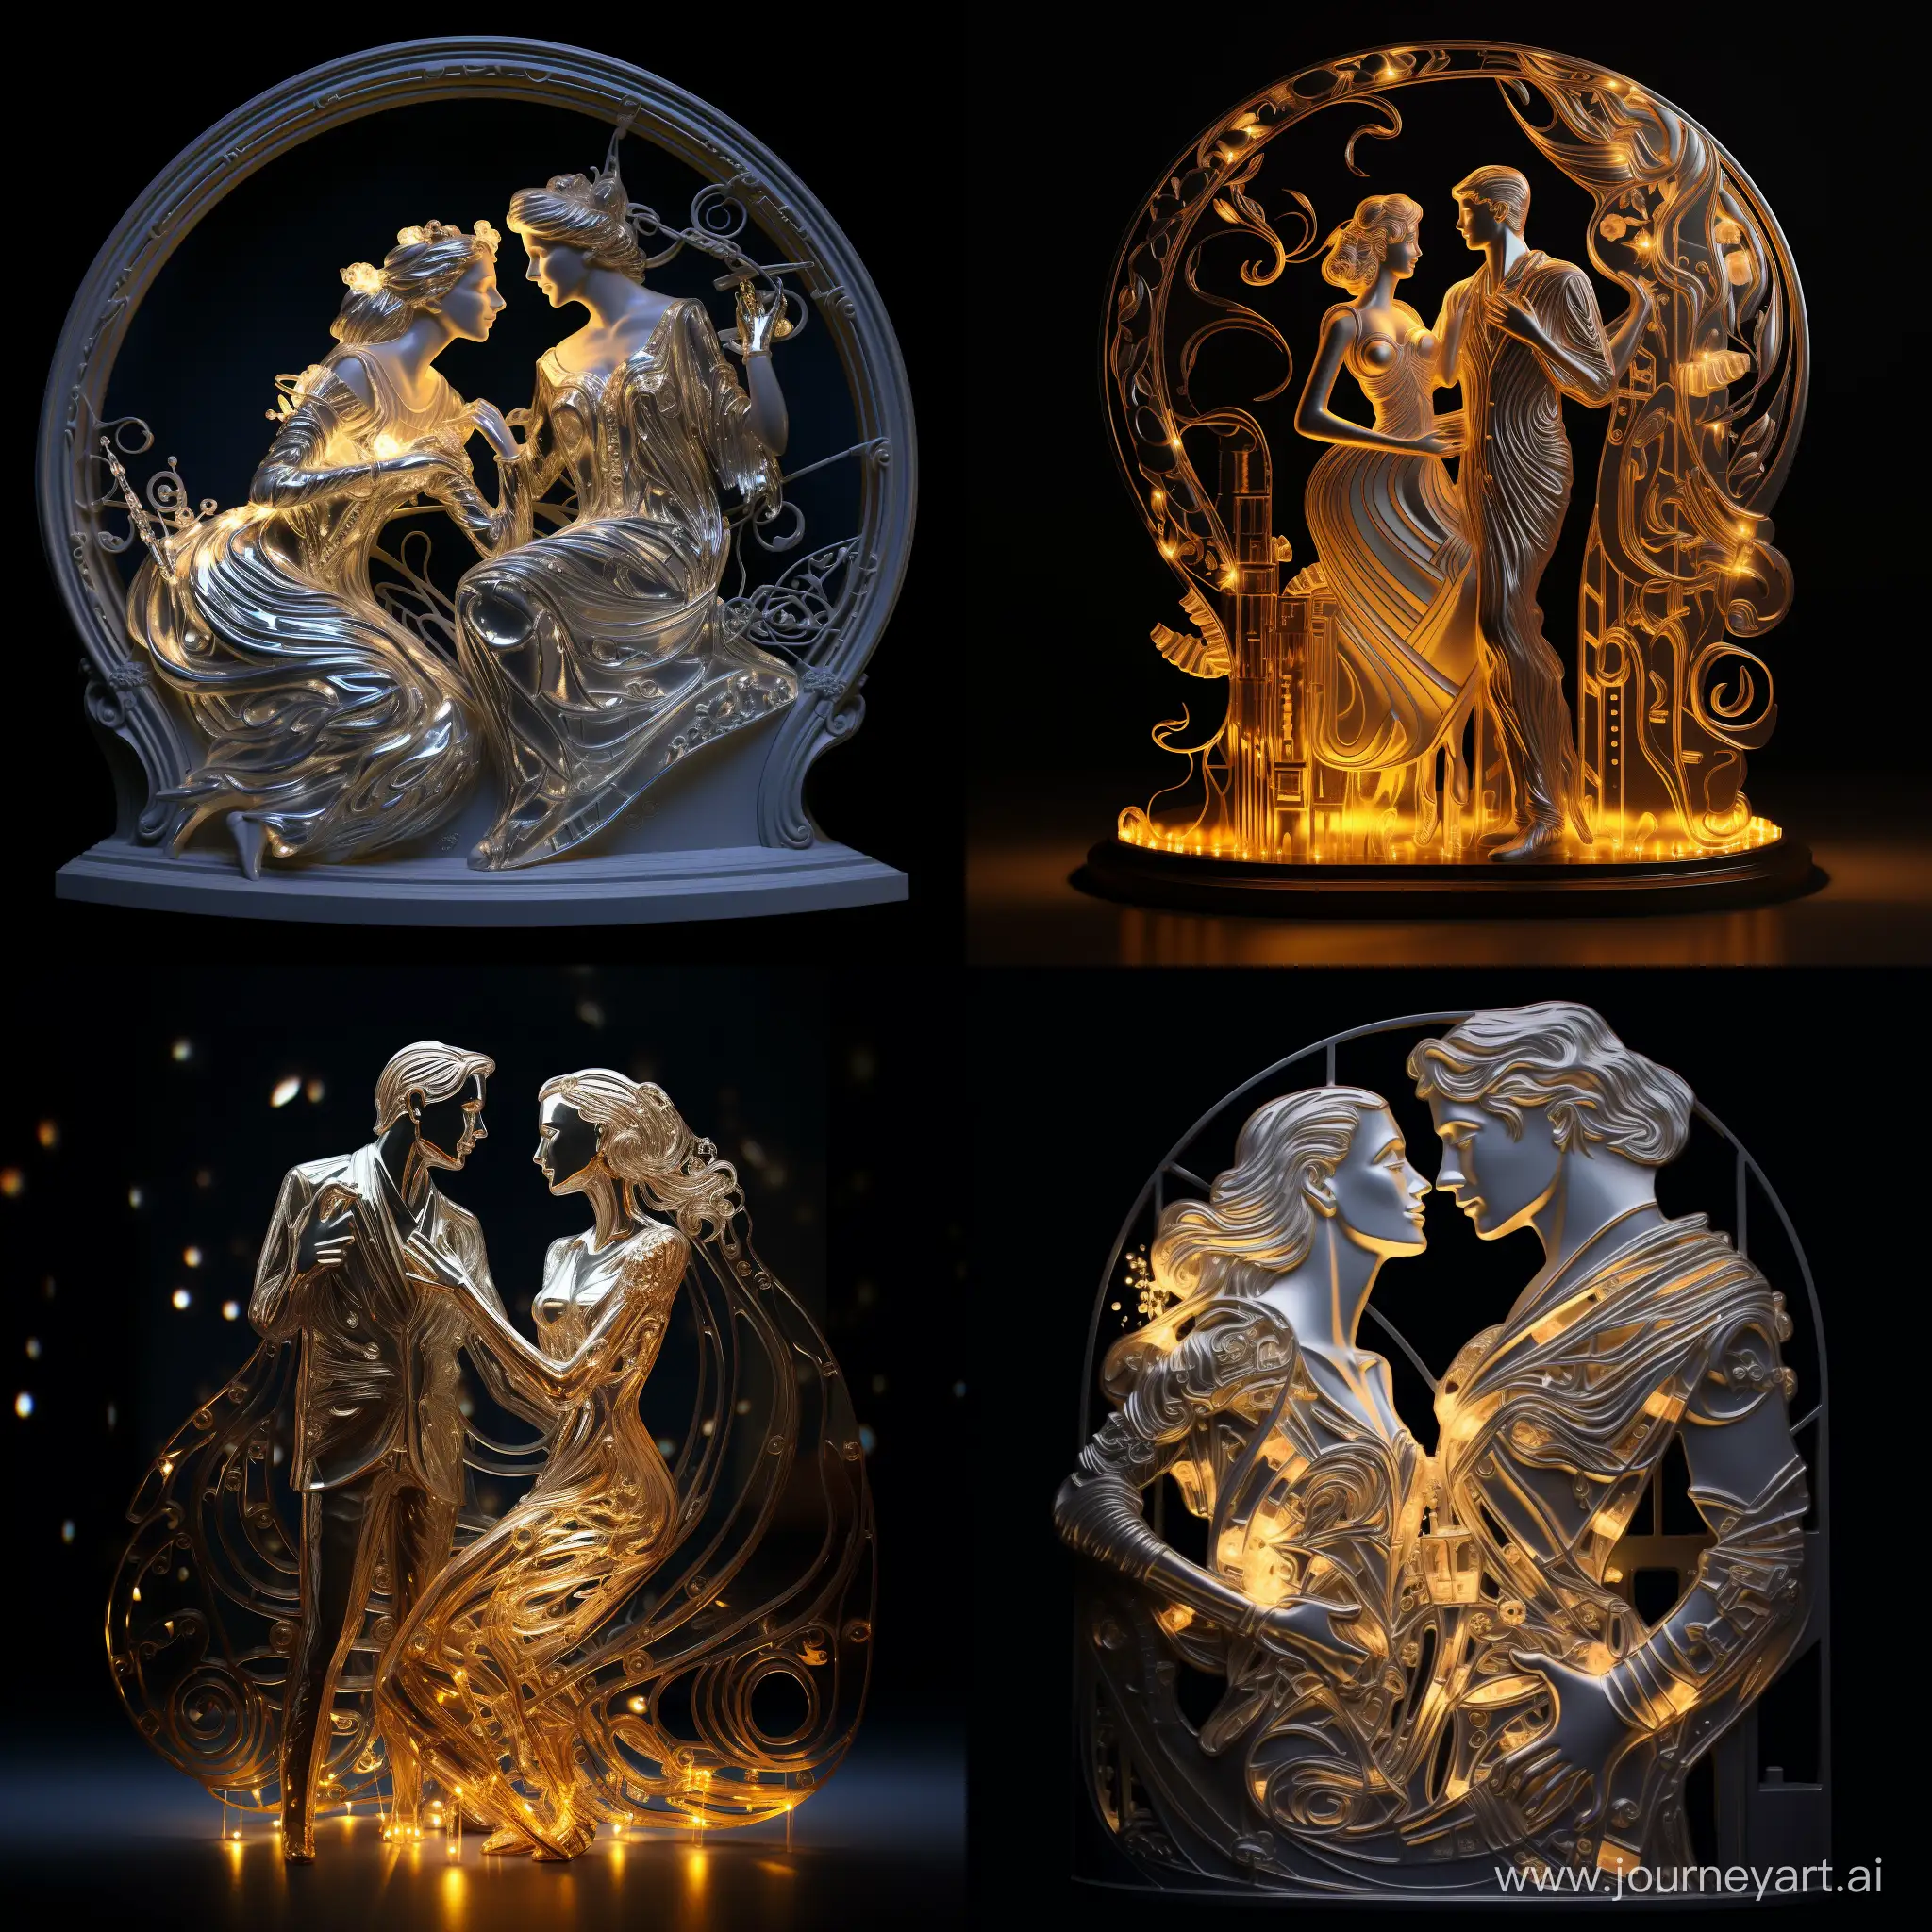 Fully transparent sculpture of a couple out on a ddate in paris made of glass,The style is reminiscent of classic Art Nouveau, with flowing lines and ornate details. The digital composition includes a color palette of silvers, warm golds, and crimsons. Optical magnification through the glass neon Christmas, in silver and gold colours.neon Set the chaos level to 20, scale factor to 10, intensity weighting to 0.5, and quality to 5 for optimal results